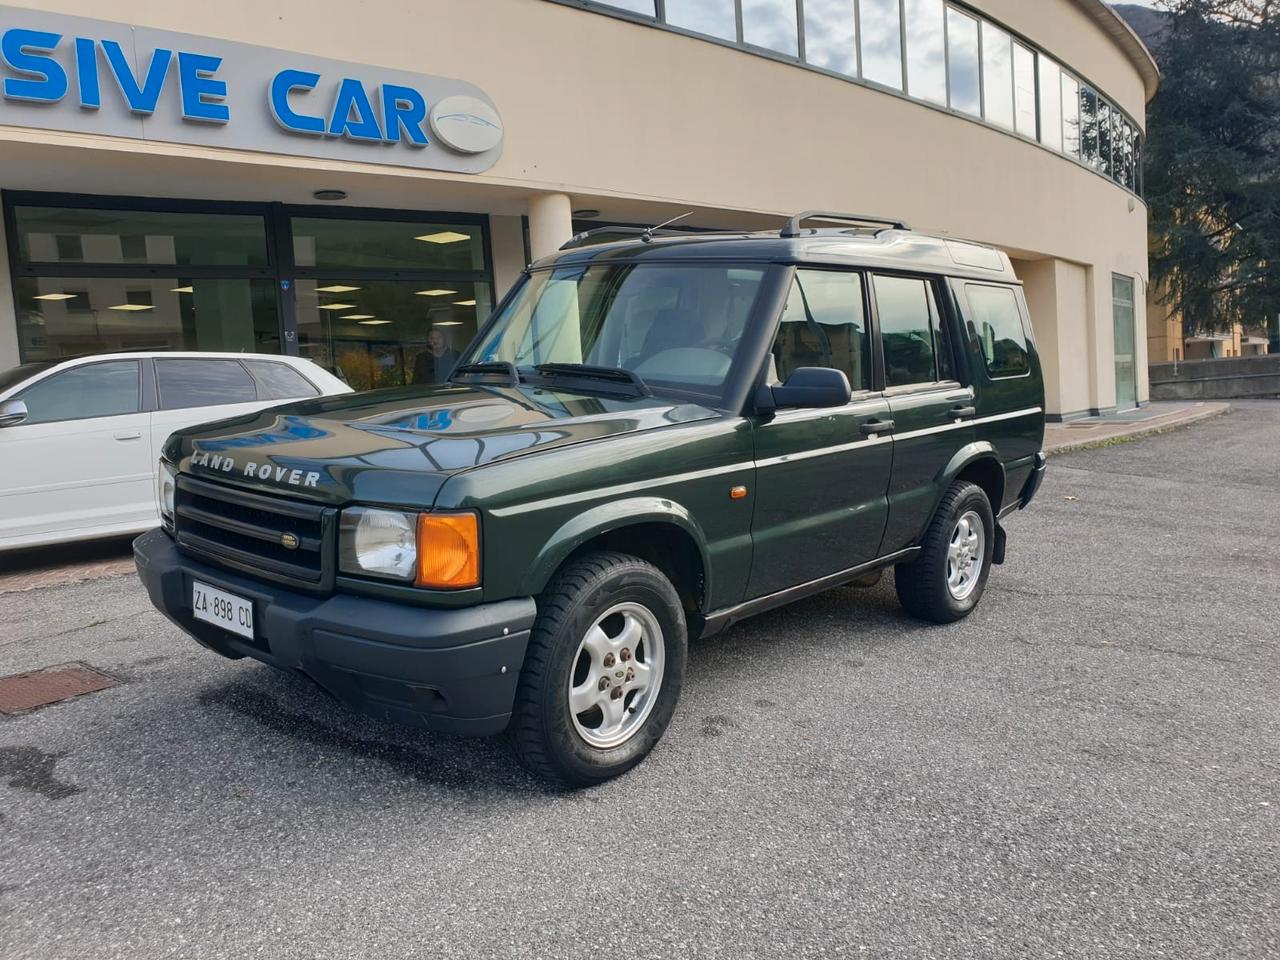 Land Rover Discovery 2.5 Td5 5 porte Luxury